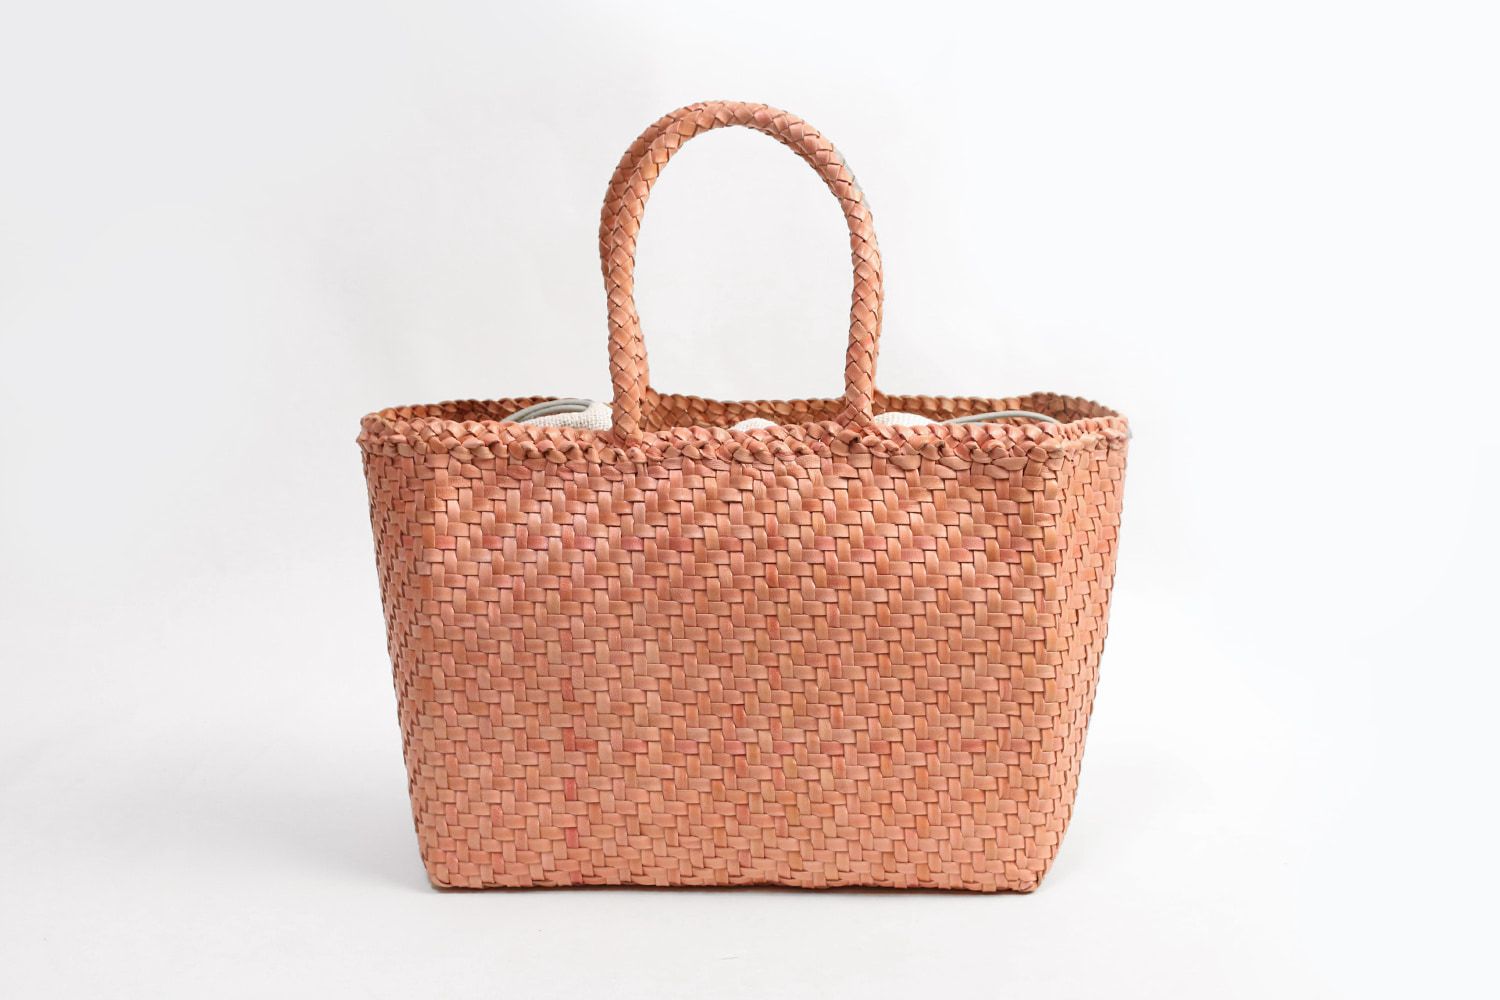 ARUKAN F-cross Leather basket bag made of beautifully woven goat leather